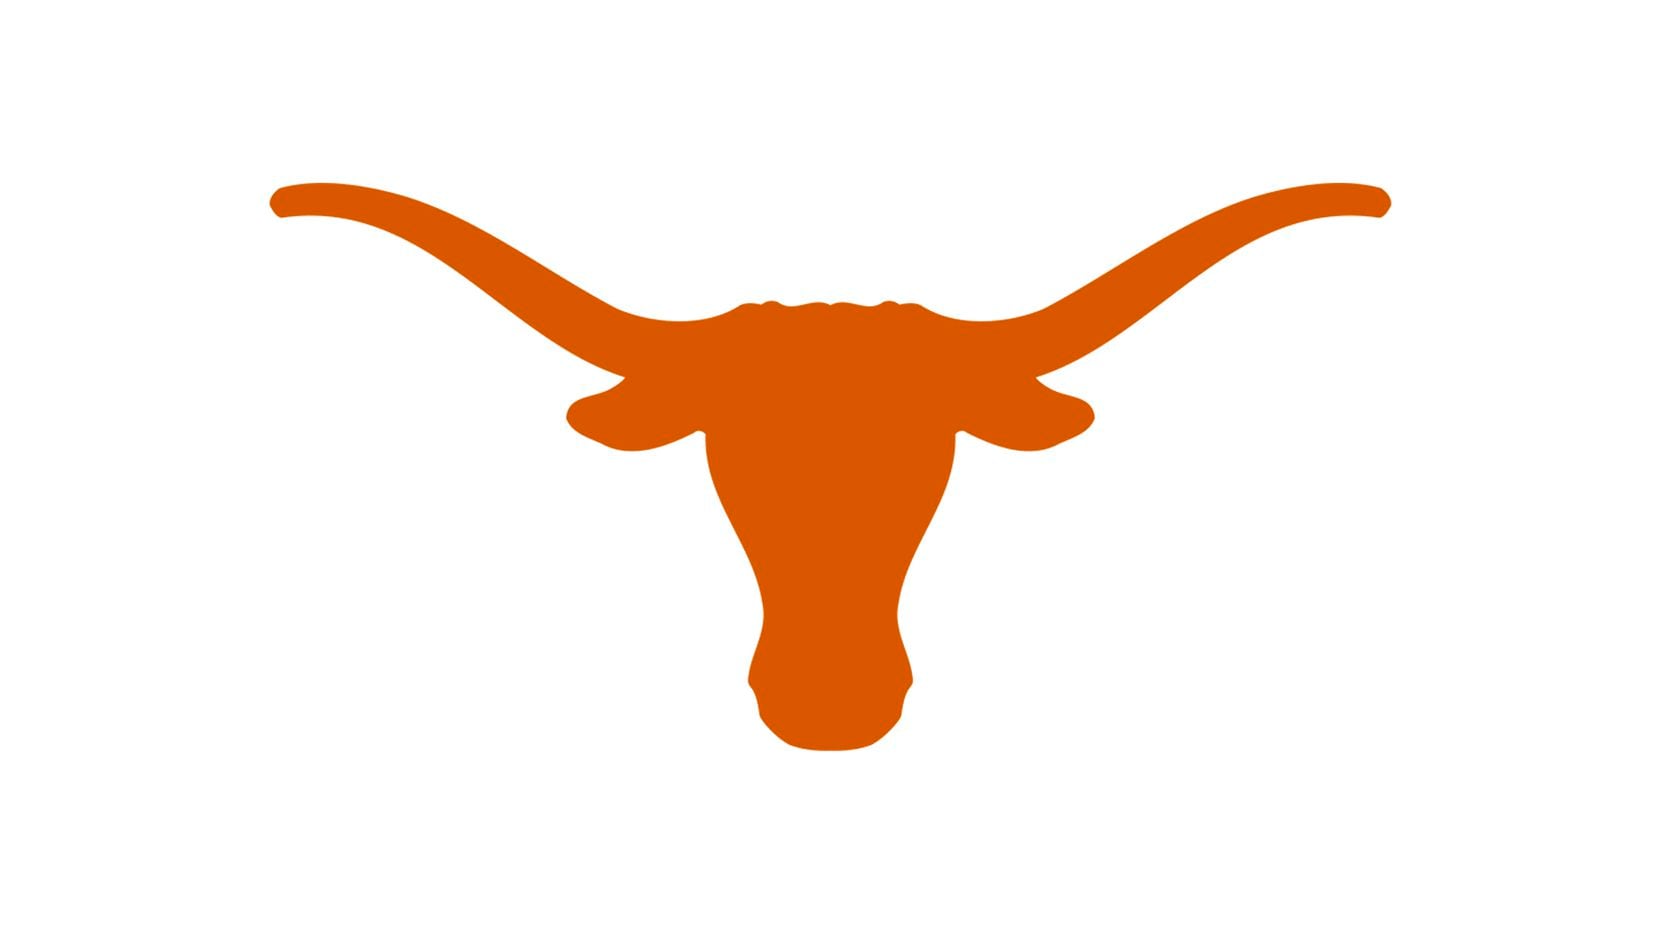 Texas athletics seeks approval for new basketball practice facility